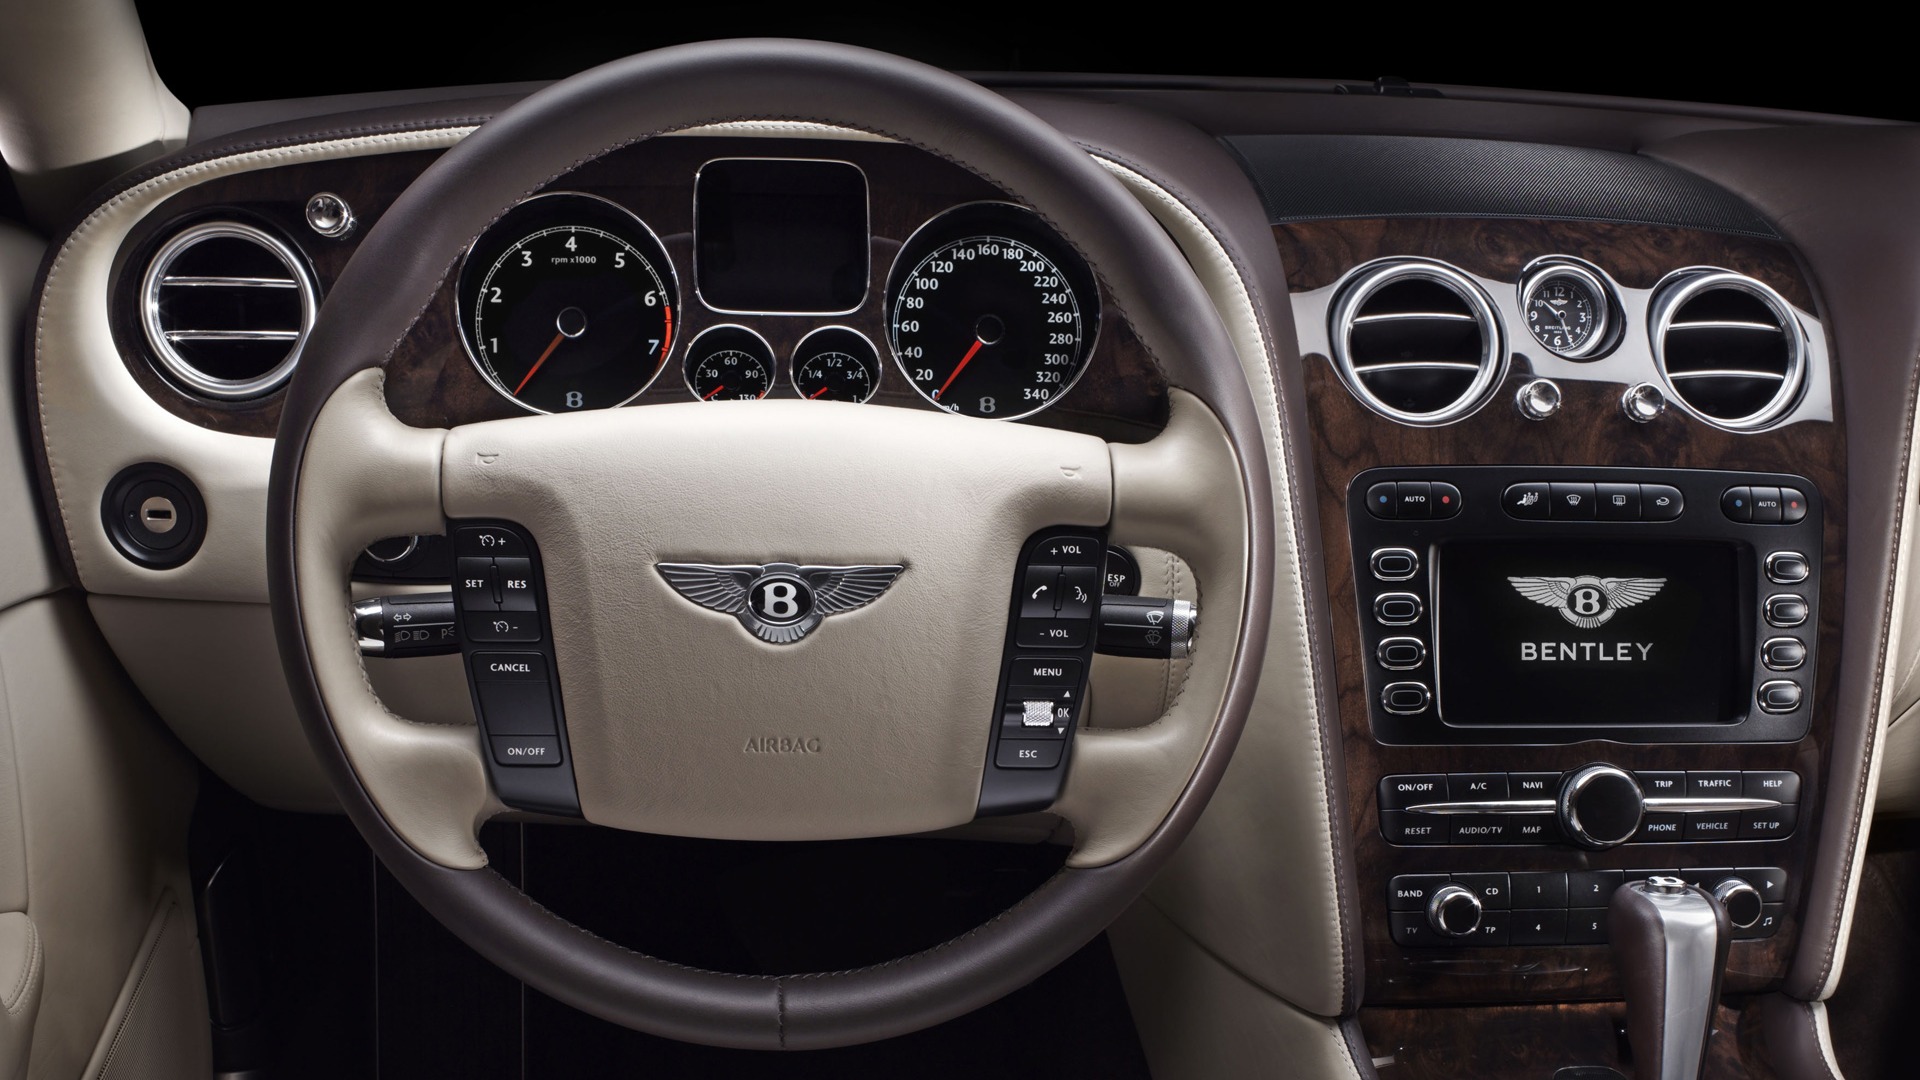 Bentley Continental Flying Spur - 2008 宾利21 - 1920x1080